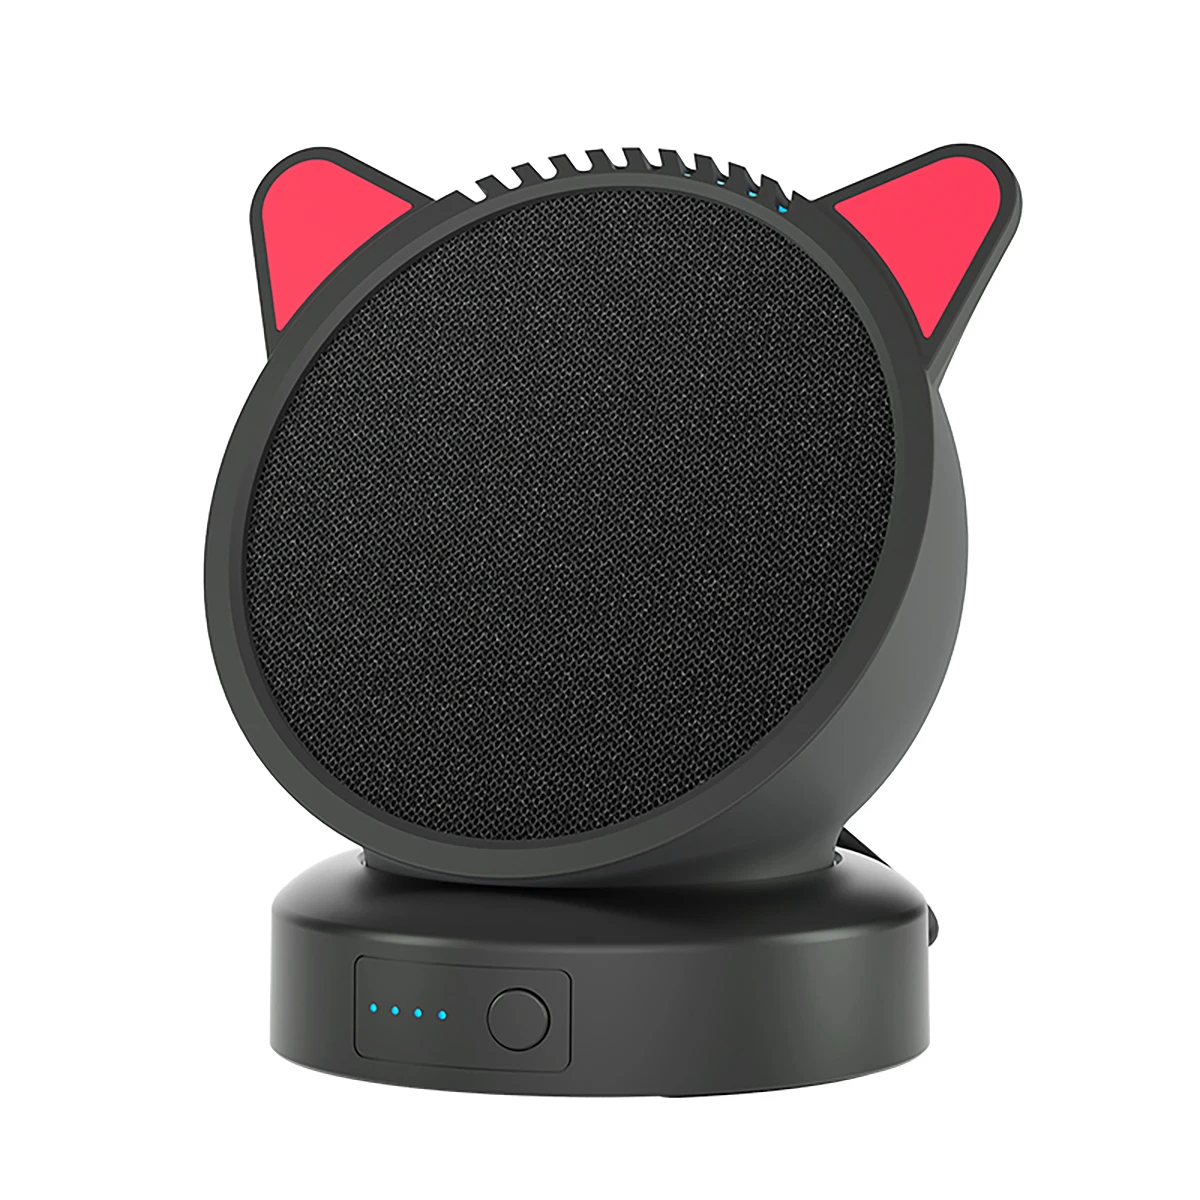 battery-base-for-alexa-echo-pop-silicone-cover-with-bunny-ears-5200mah-portable-battery-stand-with-usb-c-charging-port